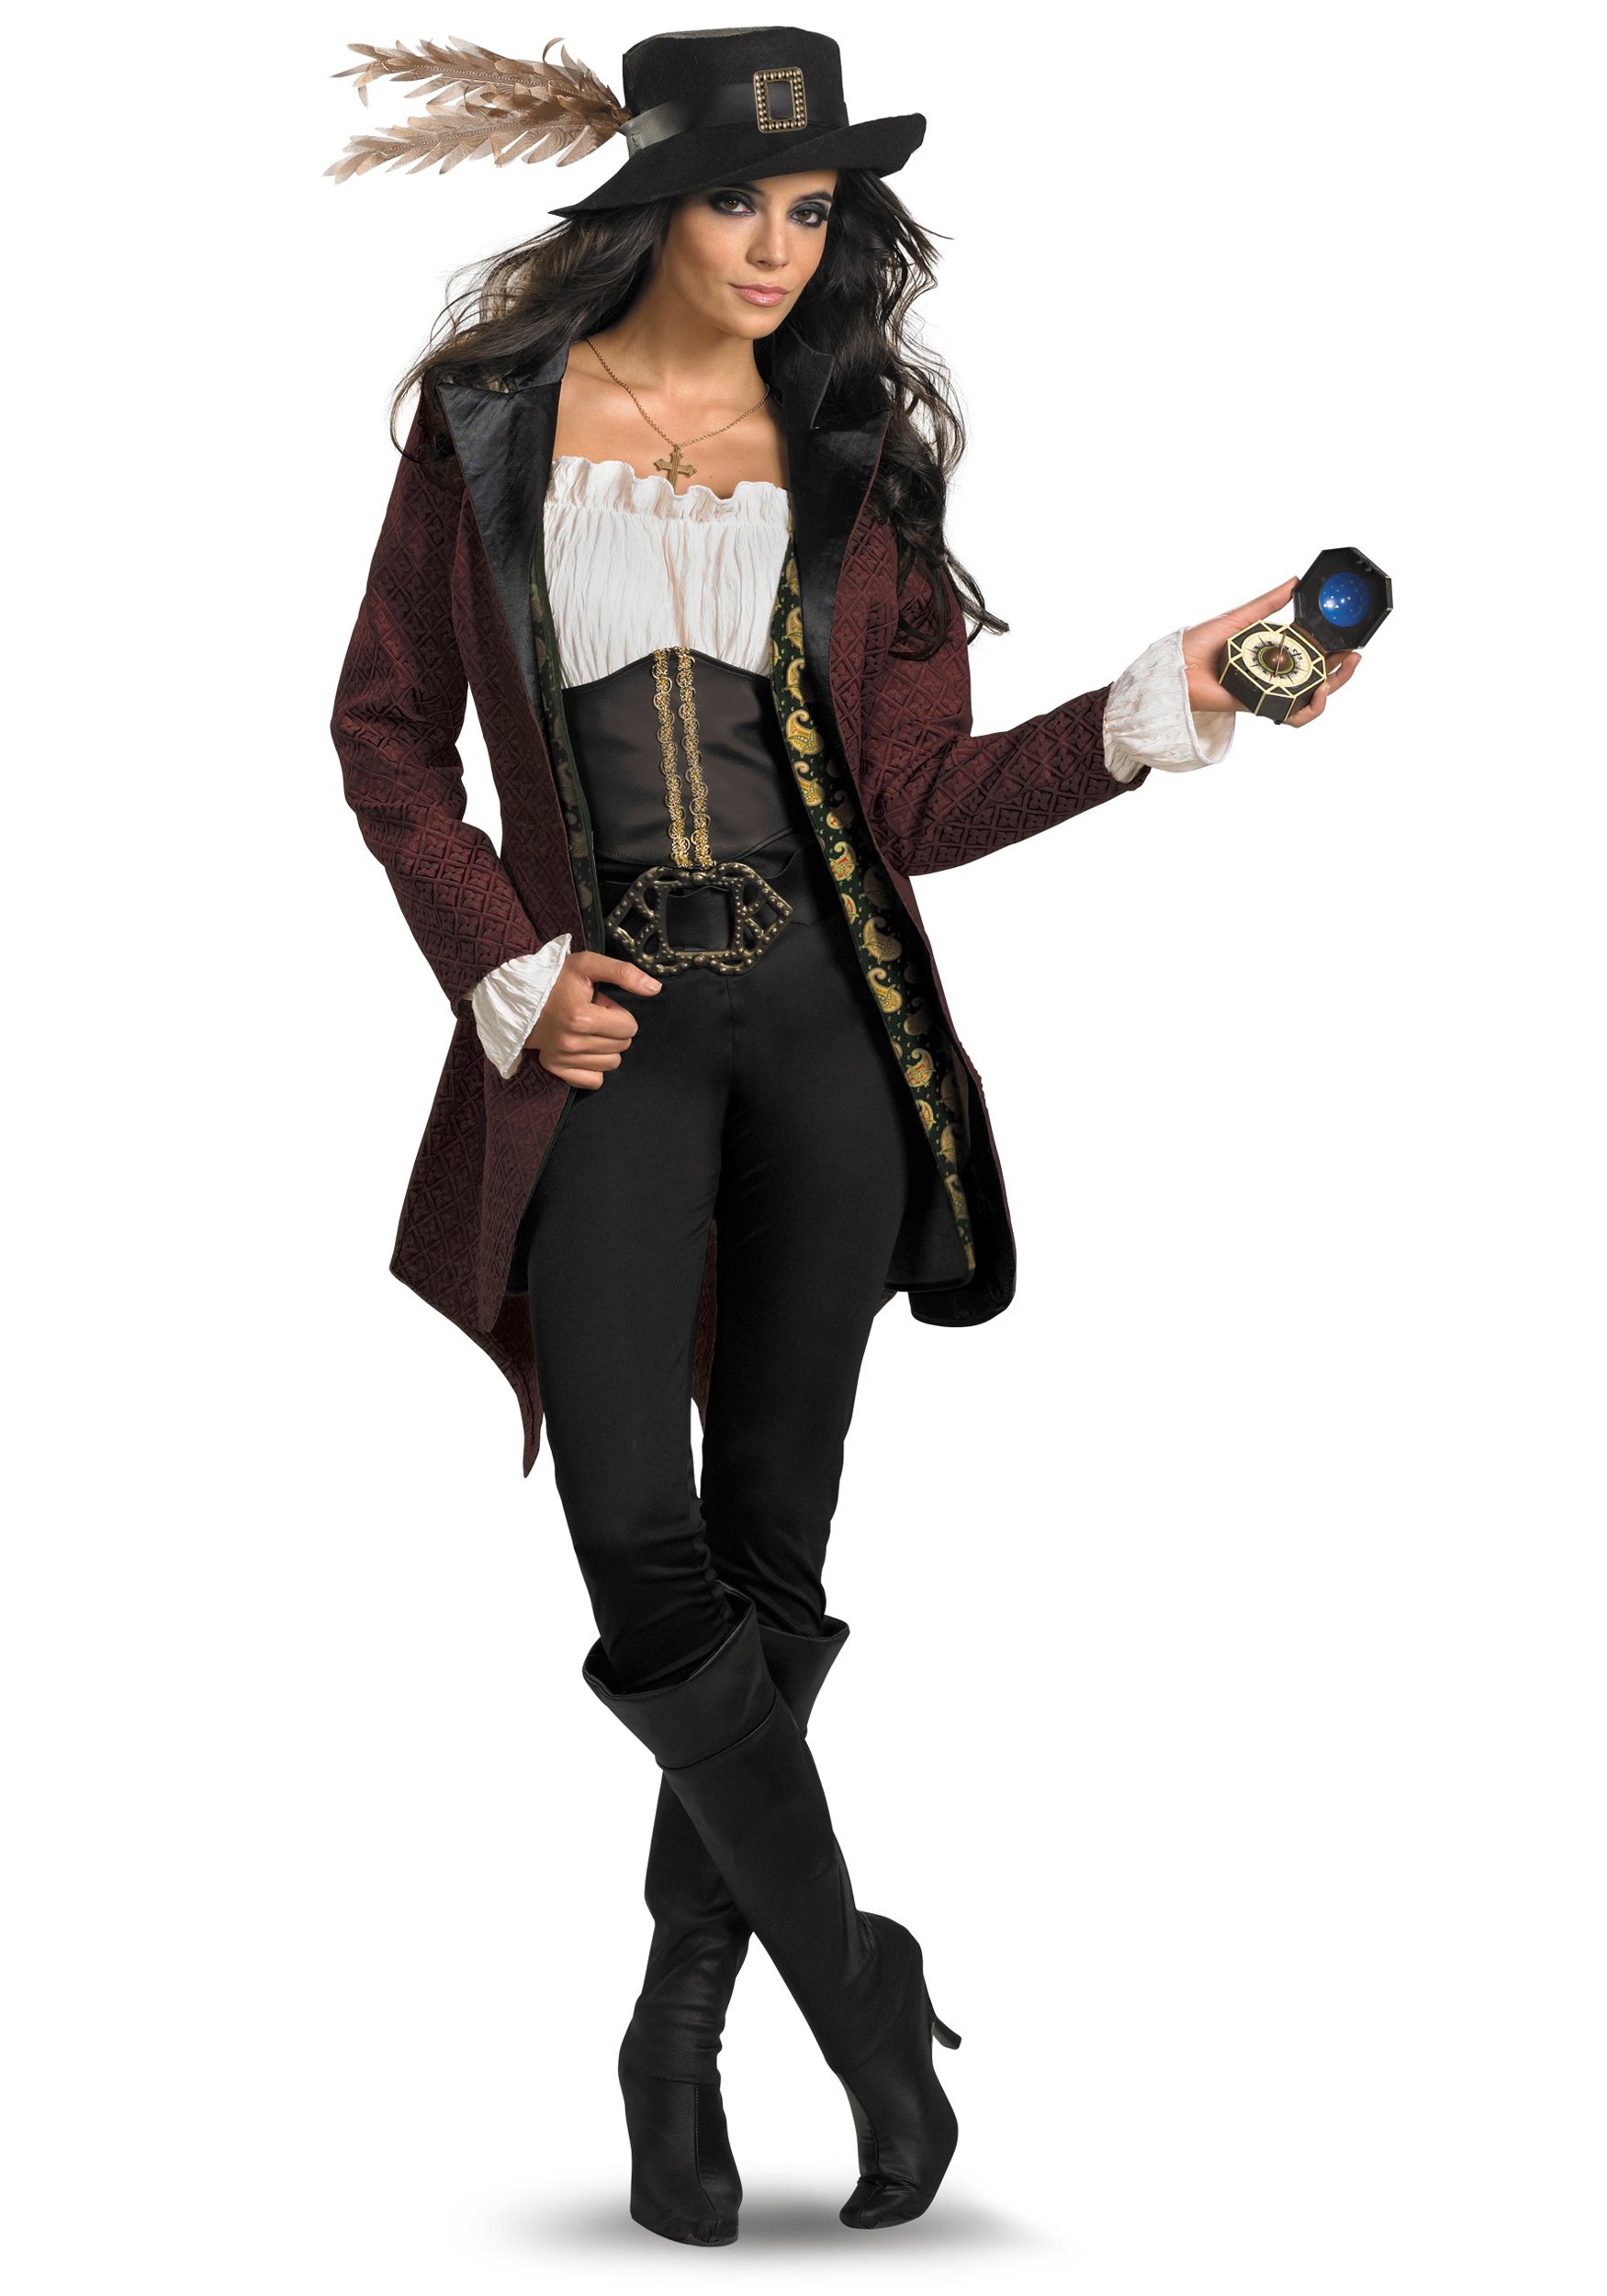 Sail the Seven Seas in These Pirate Costume Ideas - Outfit I